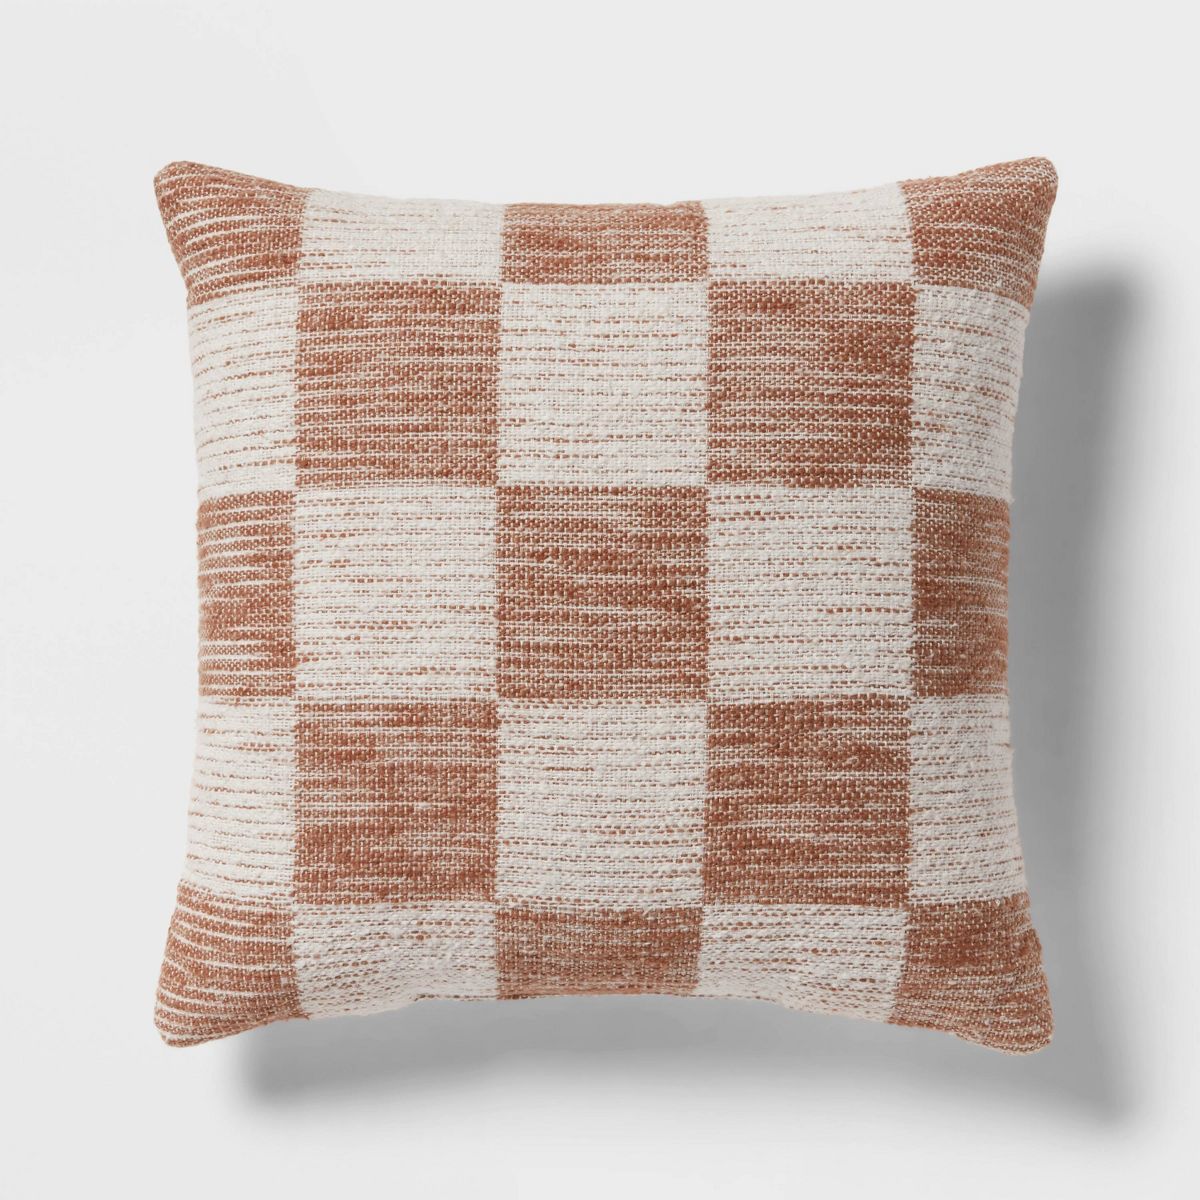 18"x18" Modern Woven Checkerboard Square Decorative Pillow Light Brown - Threshold™ | Target